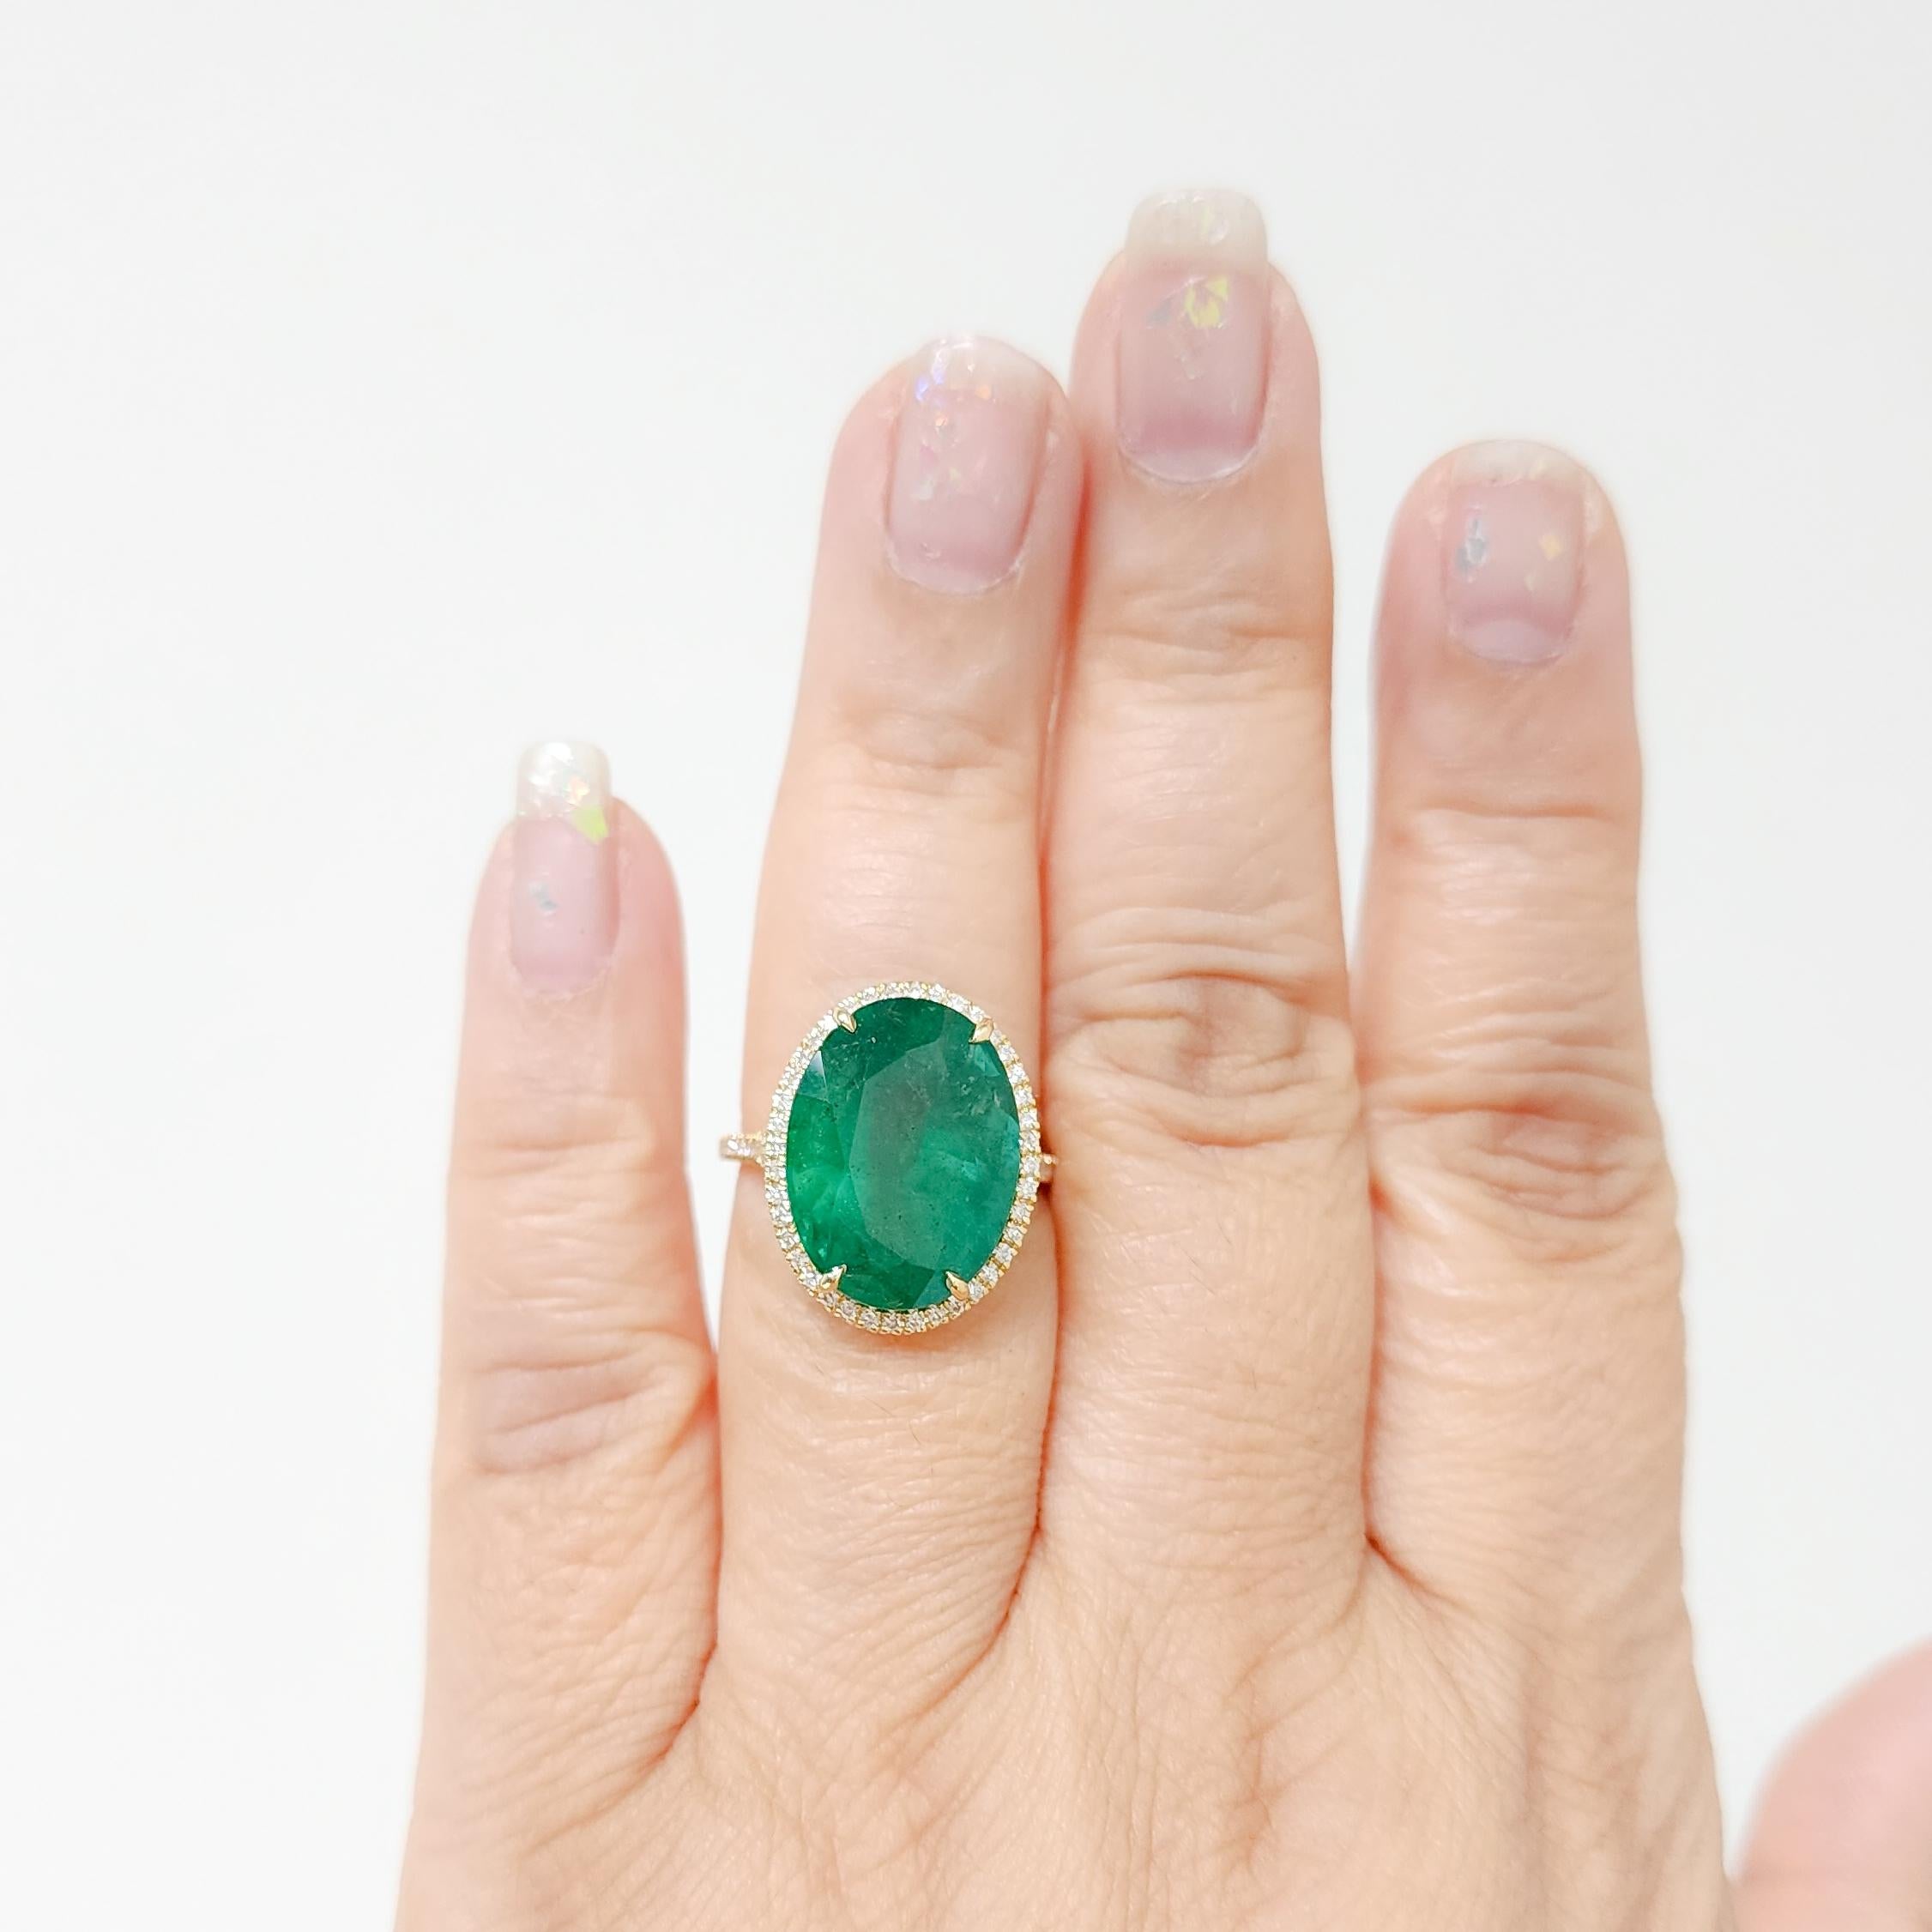 Stunning 11.74 ct. emerald oval with 0.67 ct. good quality white diamond rounds.  Handmade in 18k yellow gold.  Ring size 6.25.